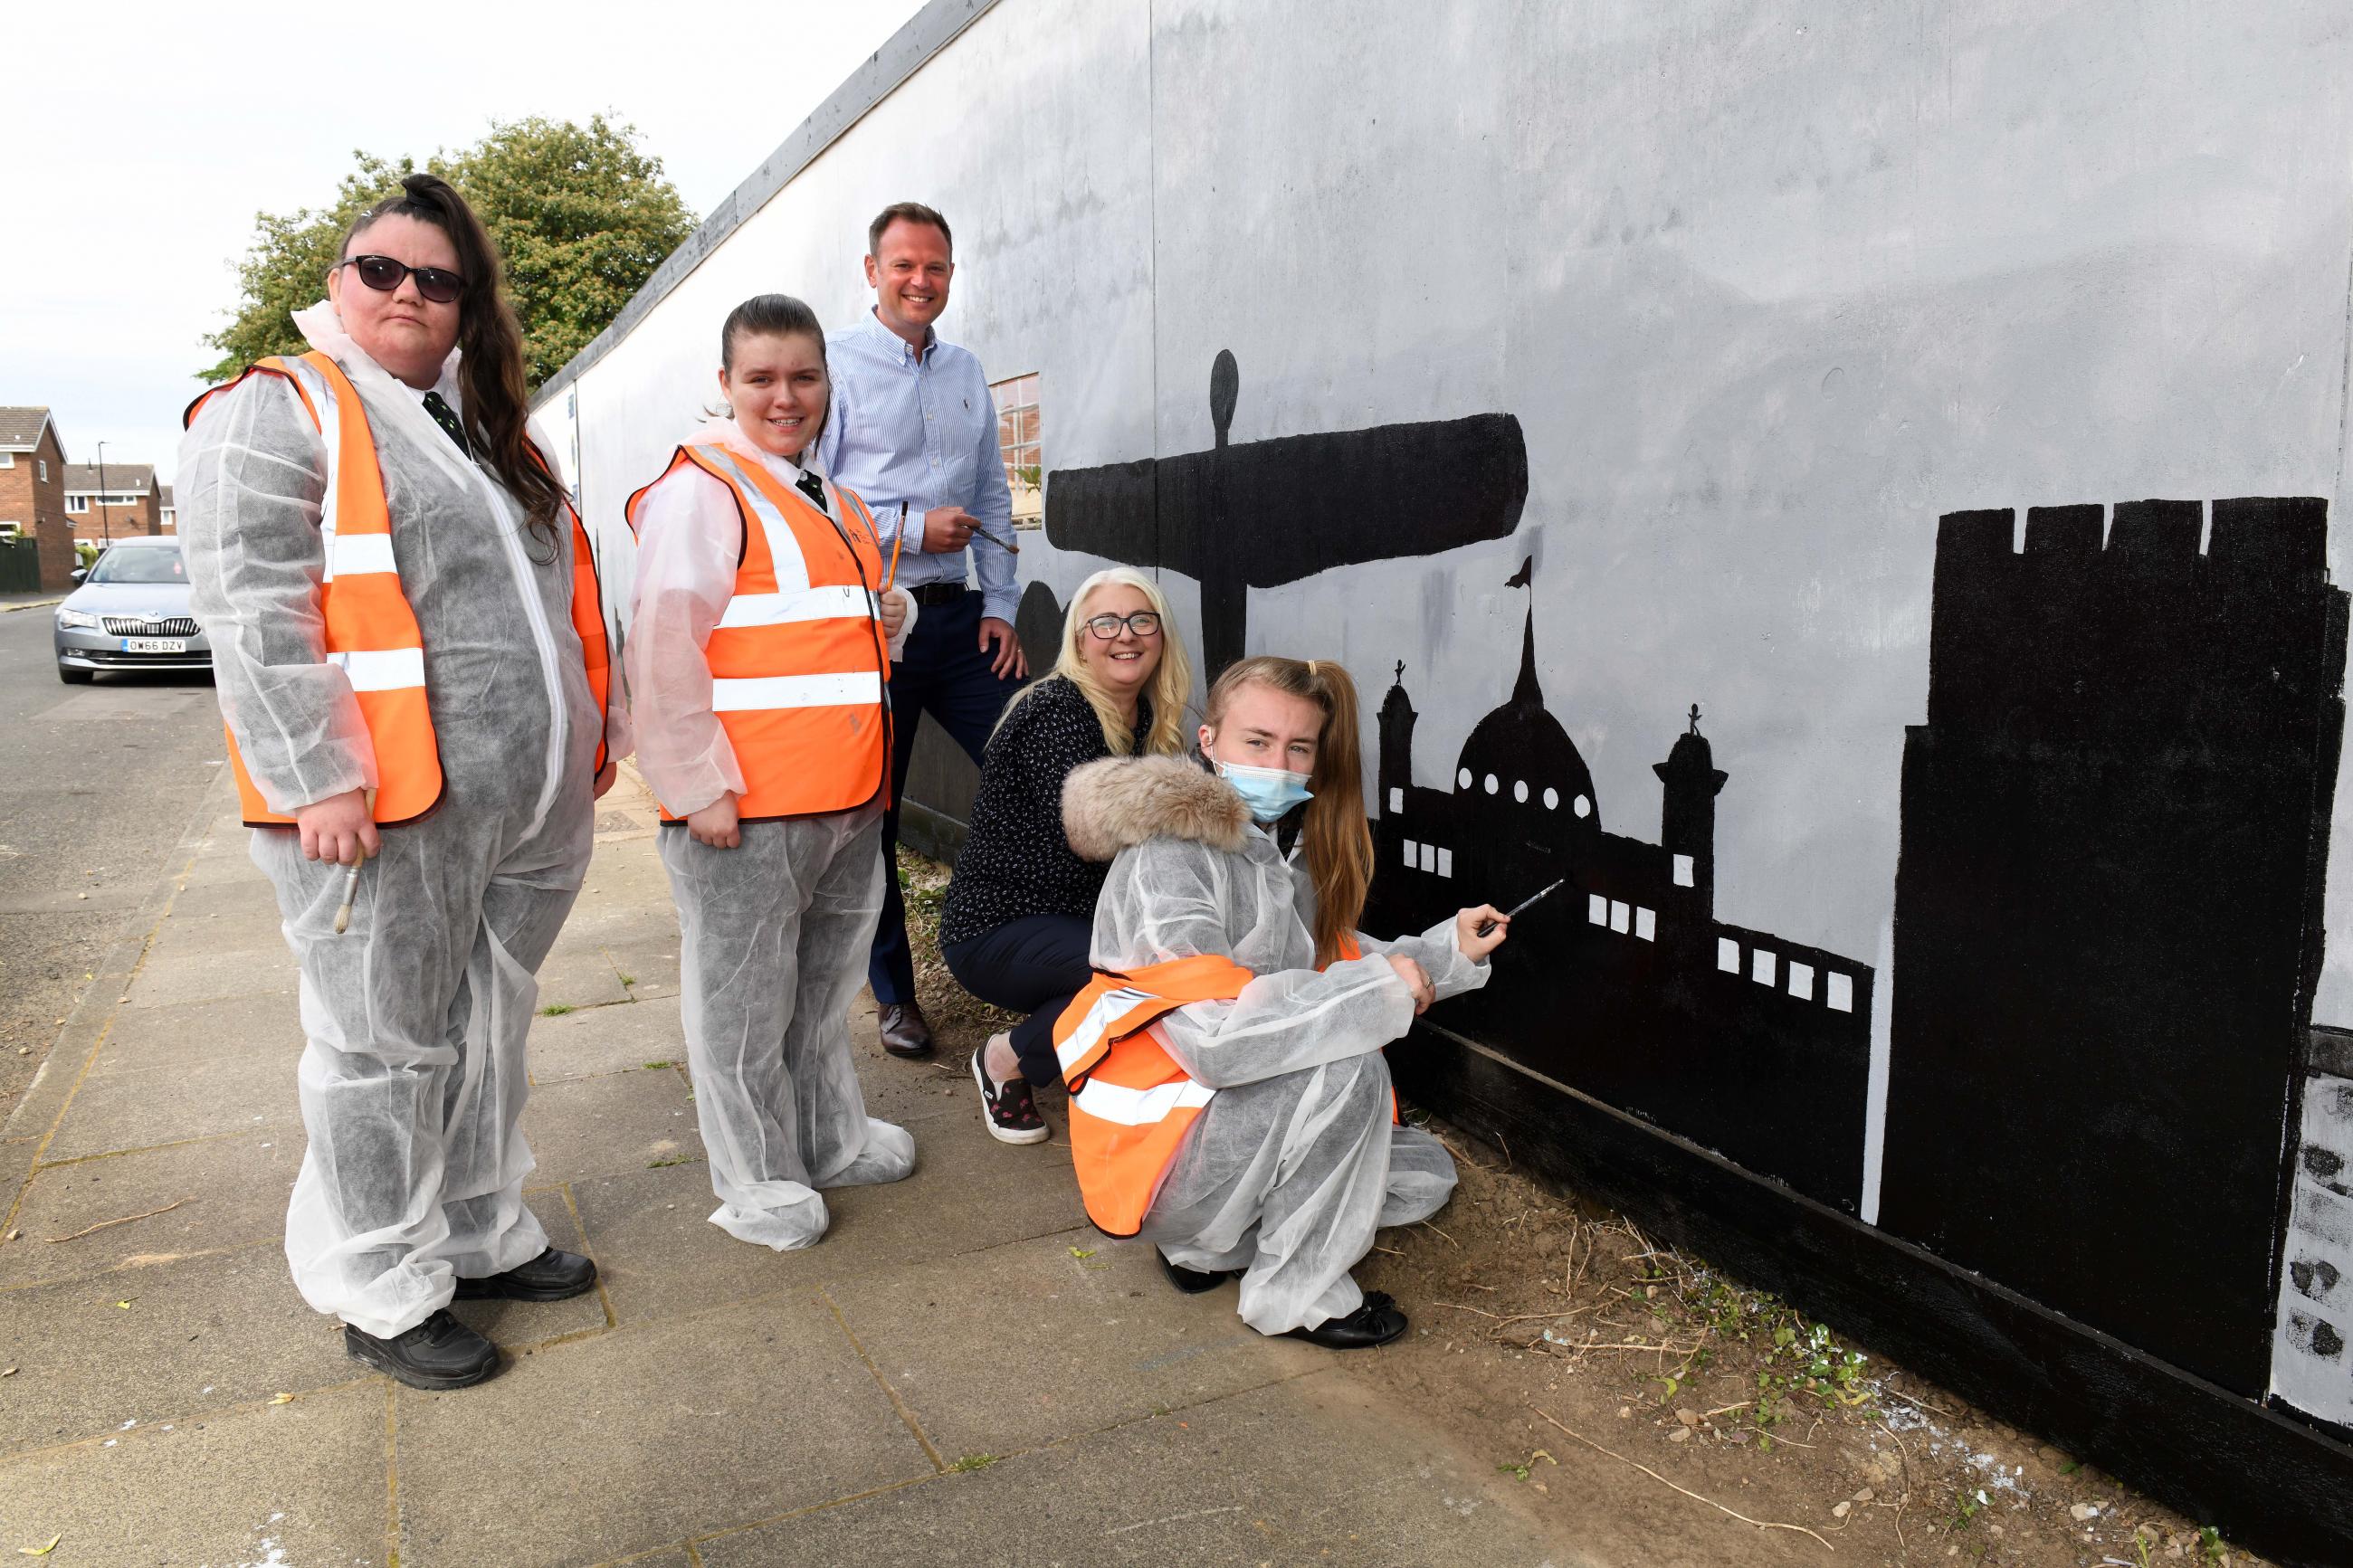 Pupils from Sir Charles Parsons School painting the mural. Pictured from left to right are Jessica Frame, Denise Newton, David Langhorne Asset and Development Director at Your Homes Newcastle, Linda Hobson Cabinet Member for Housing at Newcastle City Council and Demi-Leigh Oliver